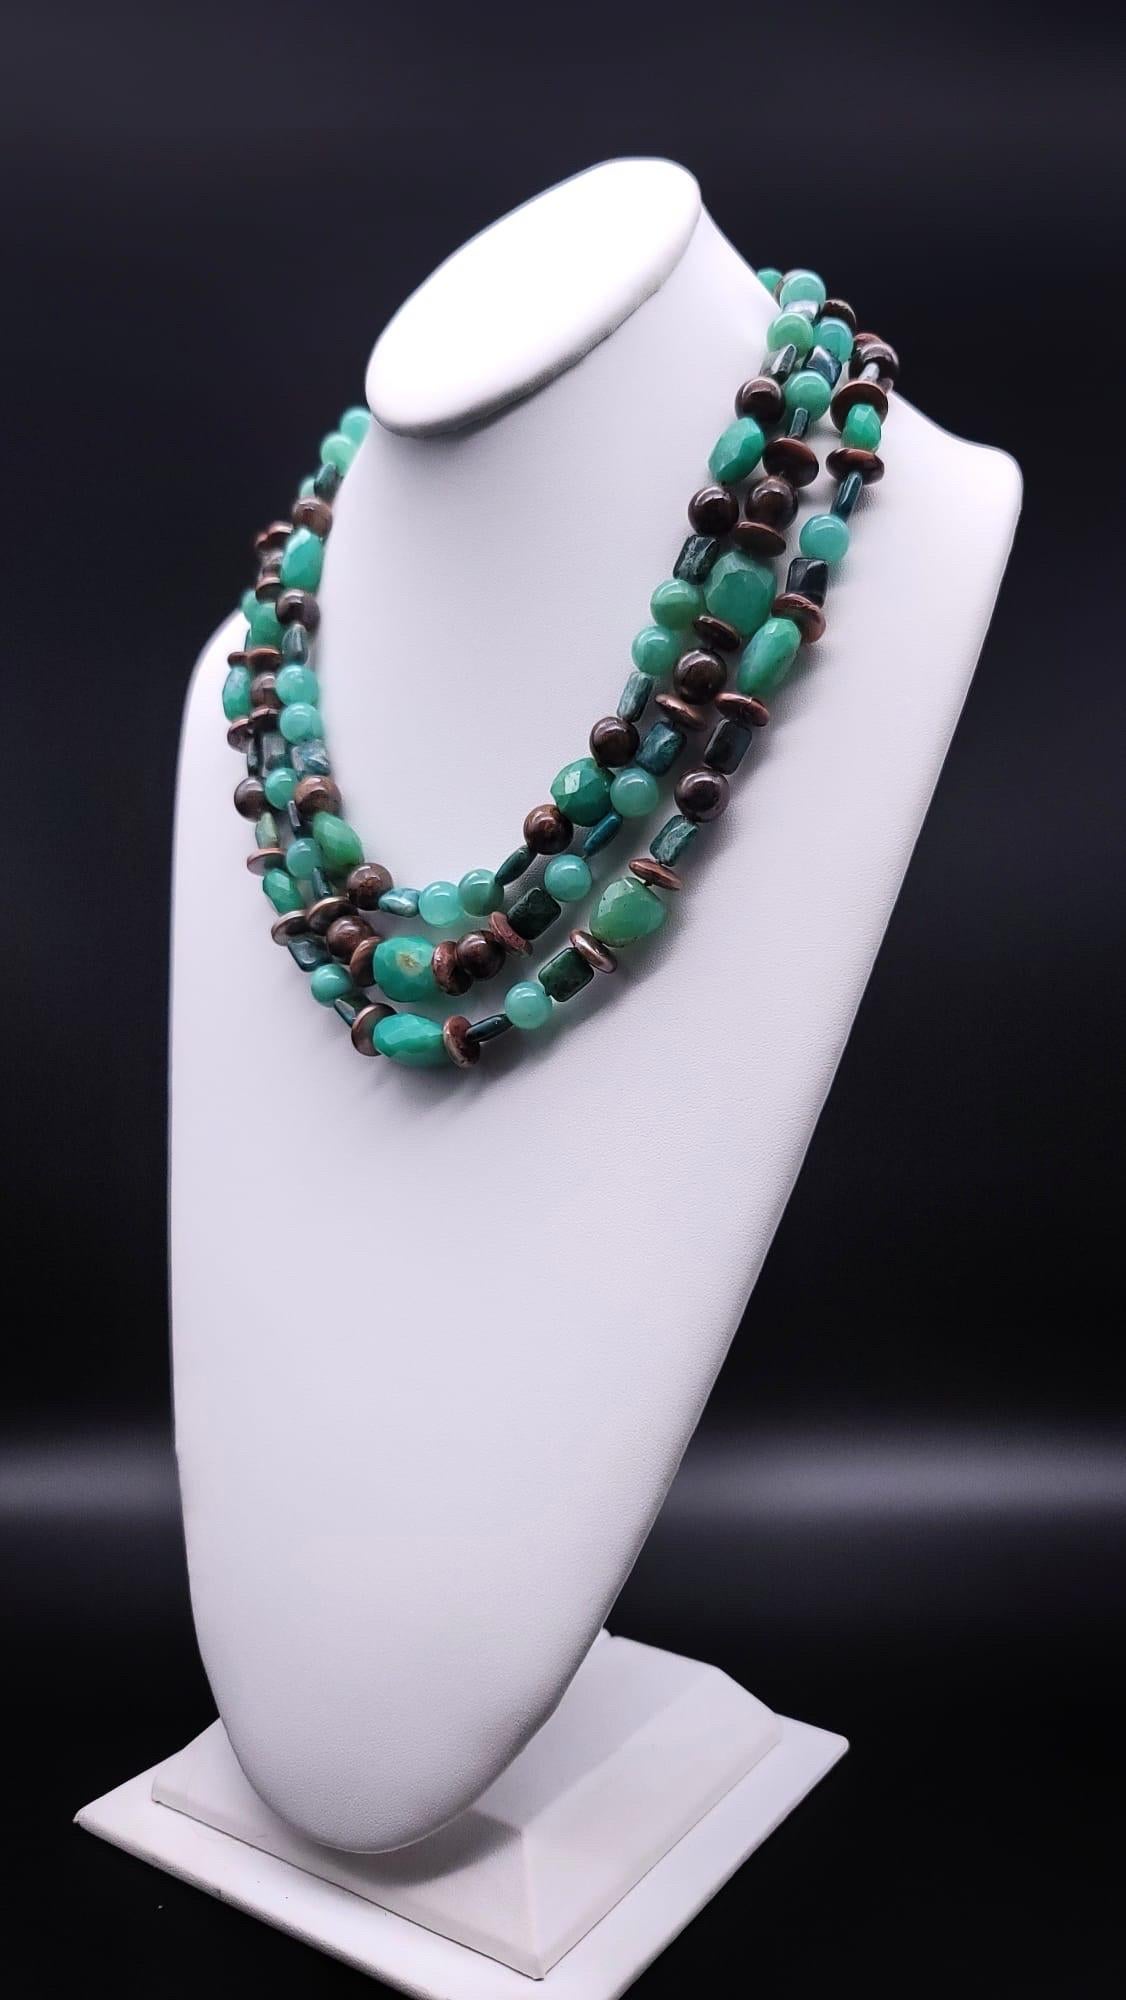 One-of-a-Kind

A veritable ragout of Chrysoprase stones in multiple cuts( faceted, polished )hues( brightest green to grass green to soft green) mixed with deep Australian brown Opal, as well as center drilled bronze Pearls, in a nested three-strand